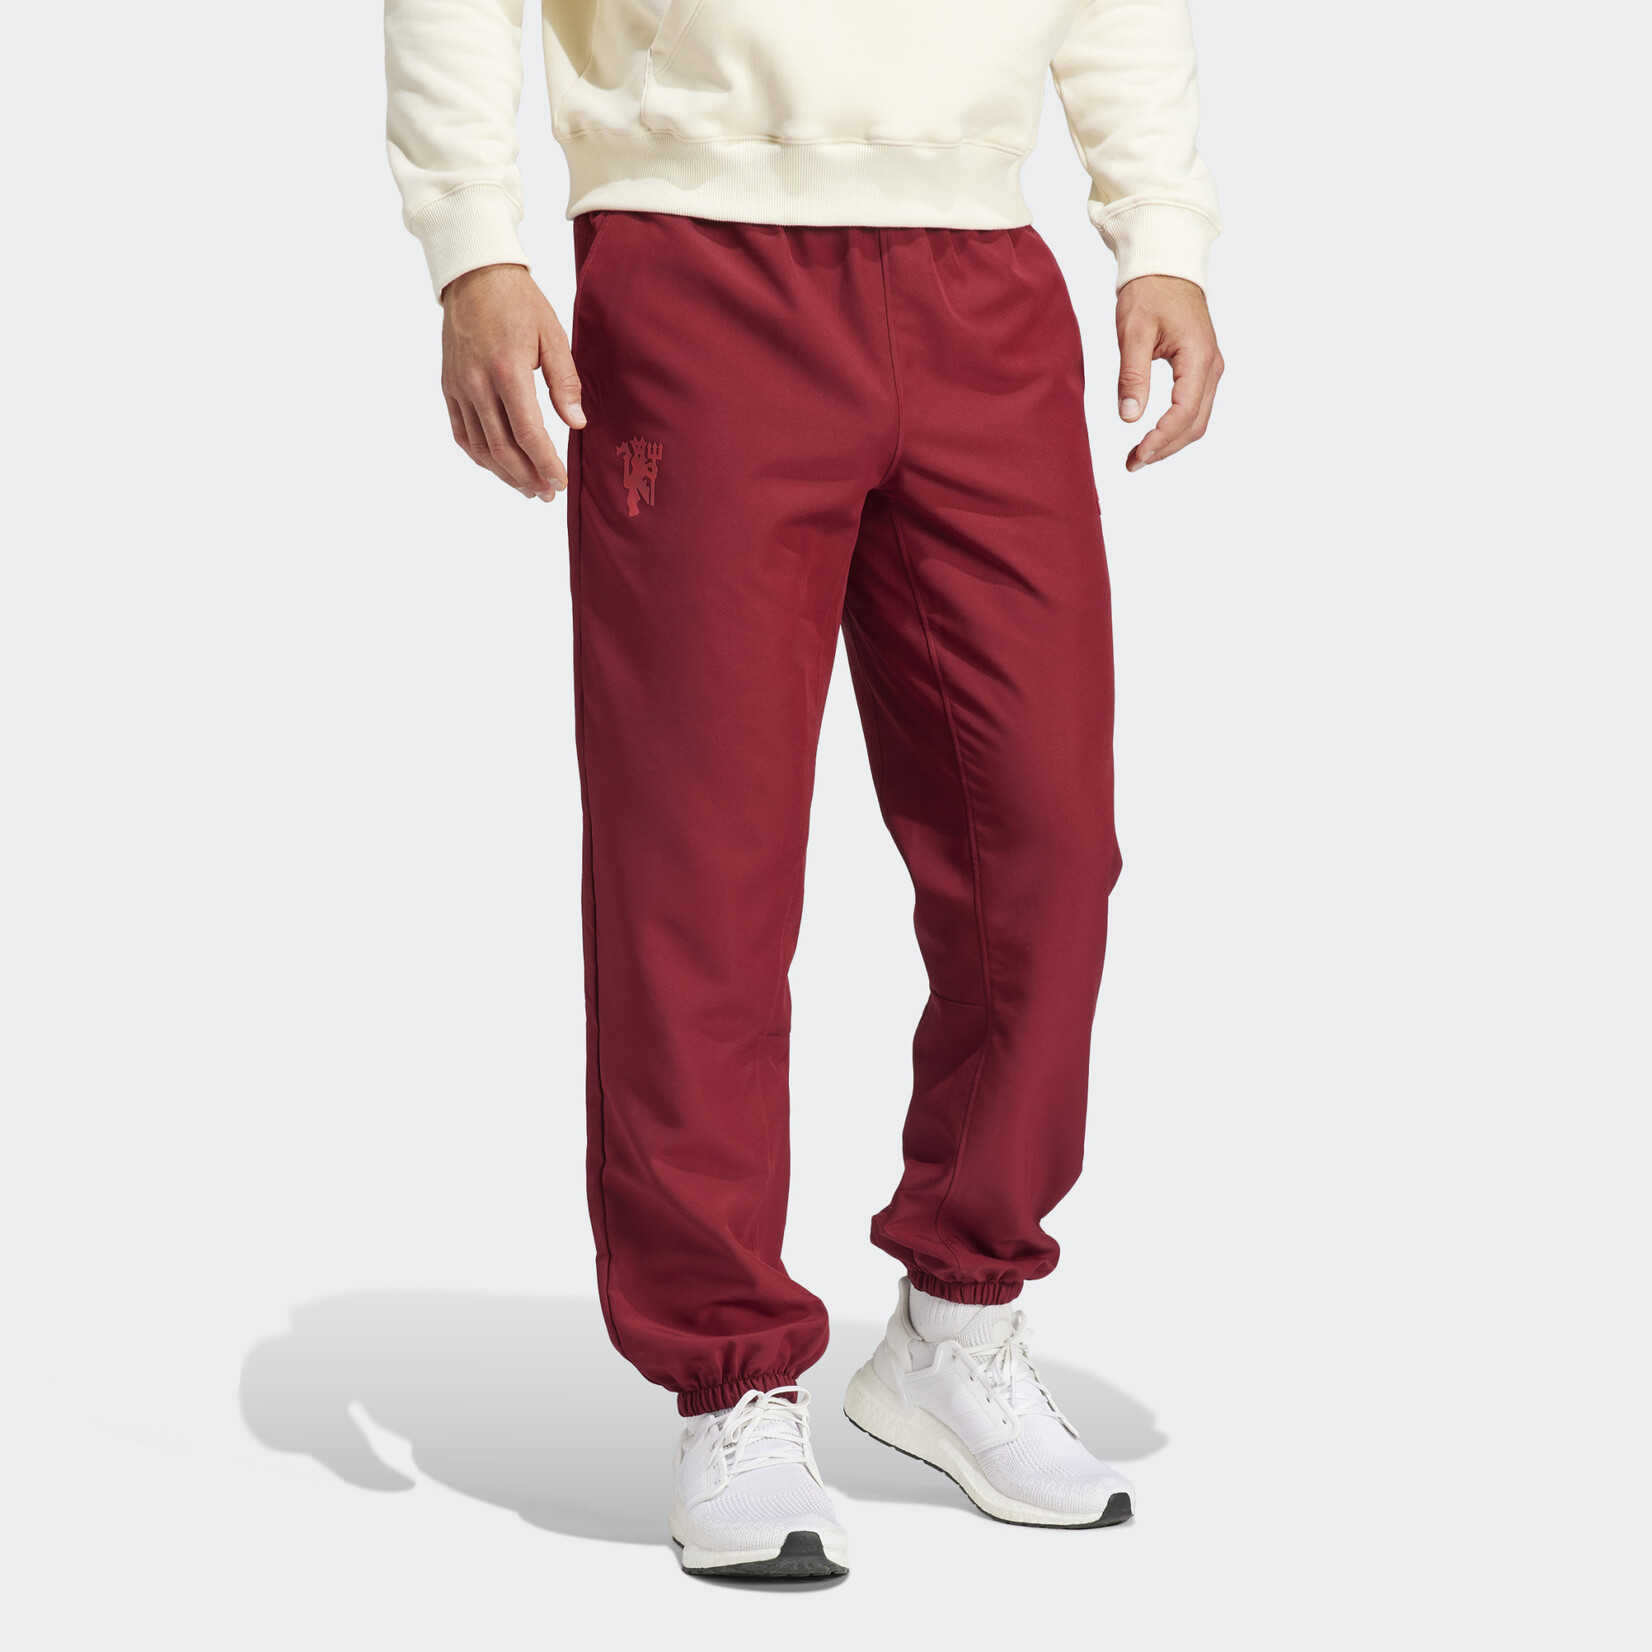 Adidas Manchester United Woven Pants - IT9047